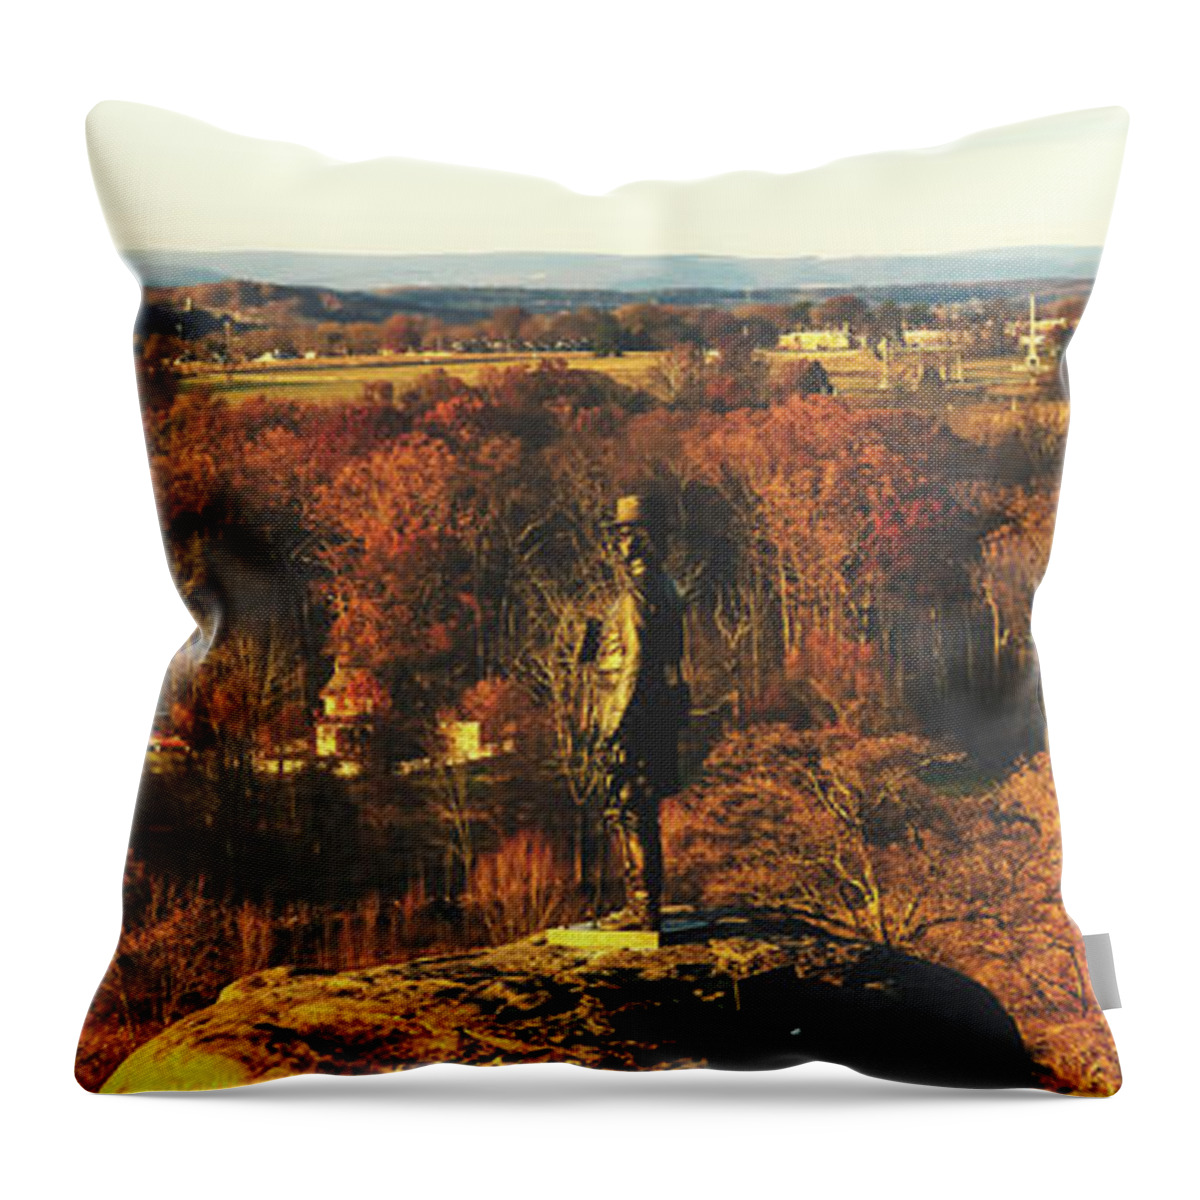 Gettysburg Throw Pillow featuring the photograph General Warren's View Of Gettysburg by Mountain Dreams